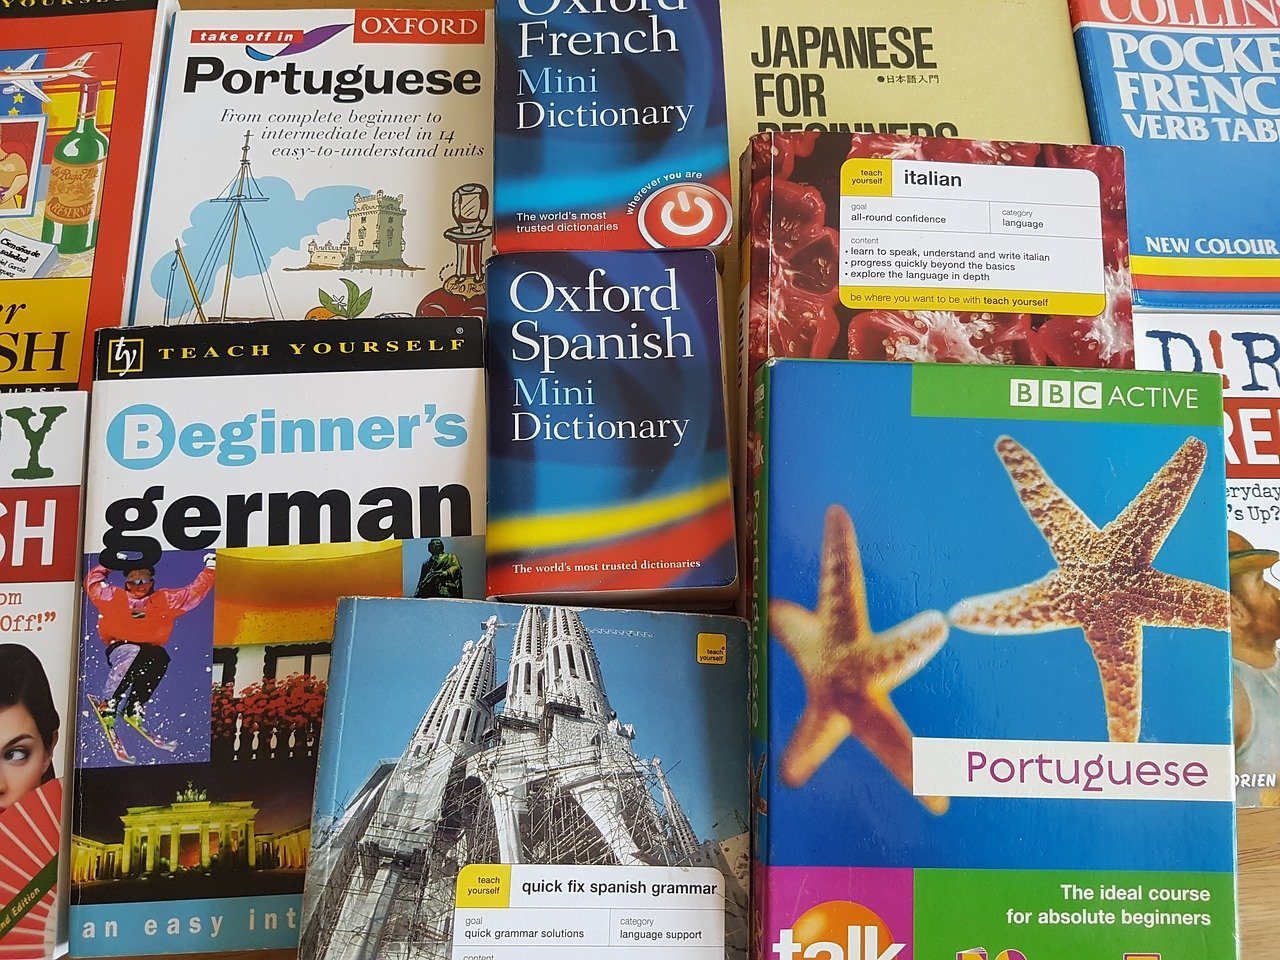 an assortment of books on learning languages.